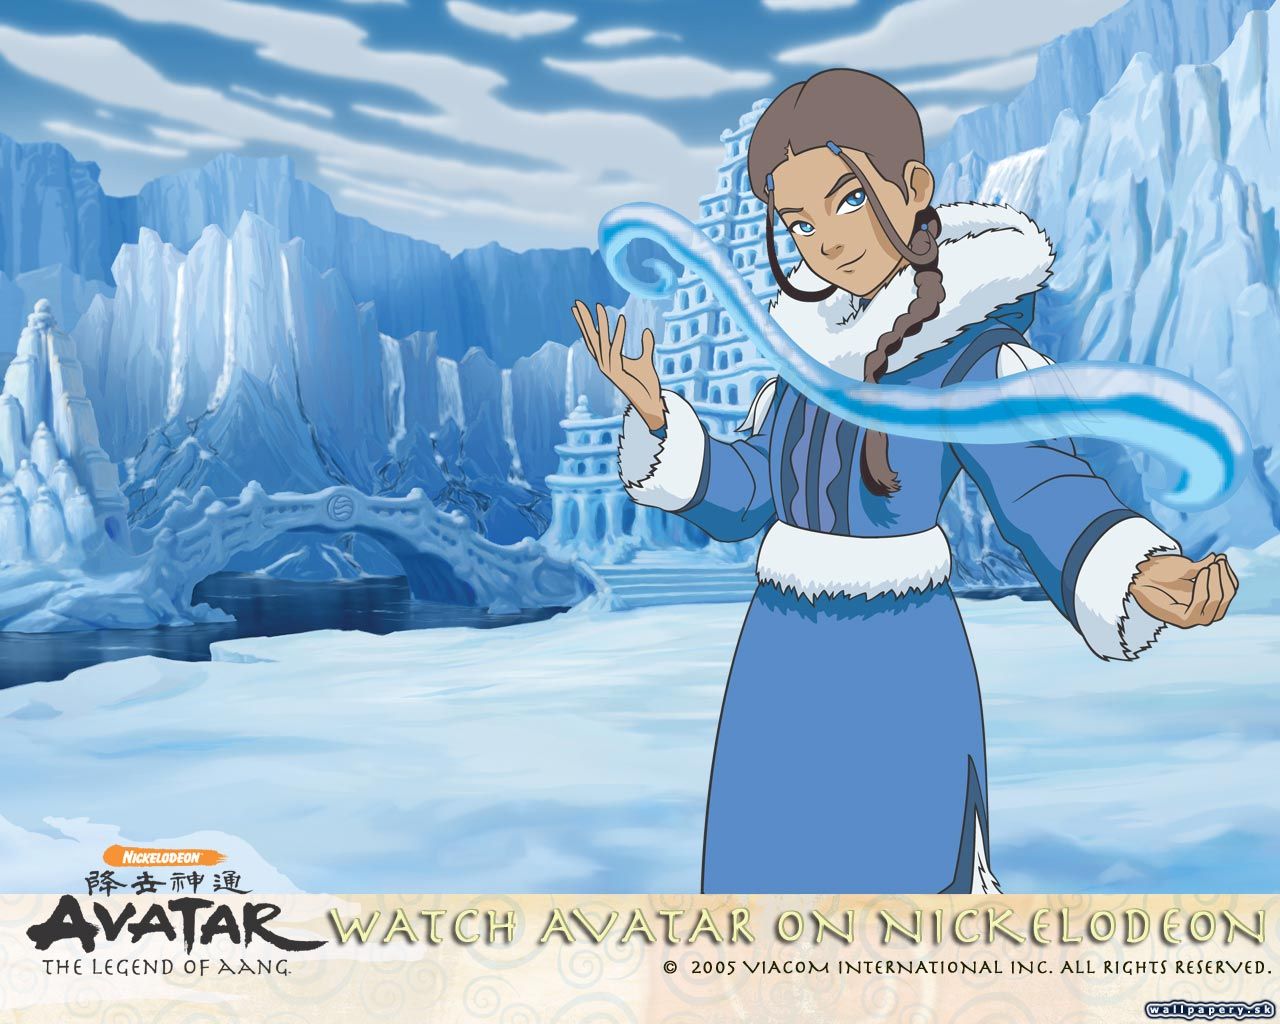 Wallpapers Avatar: The Last Airbender Anime Image #197321 Download